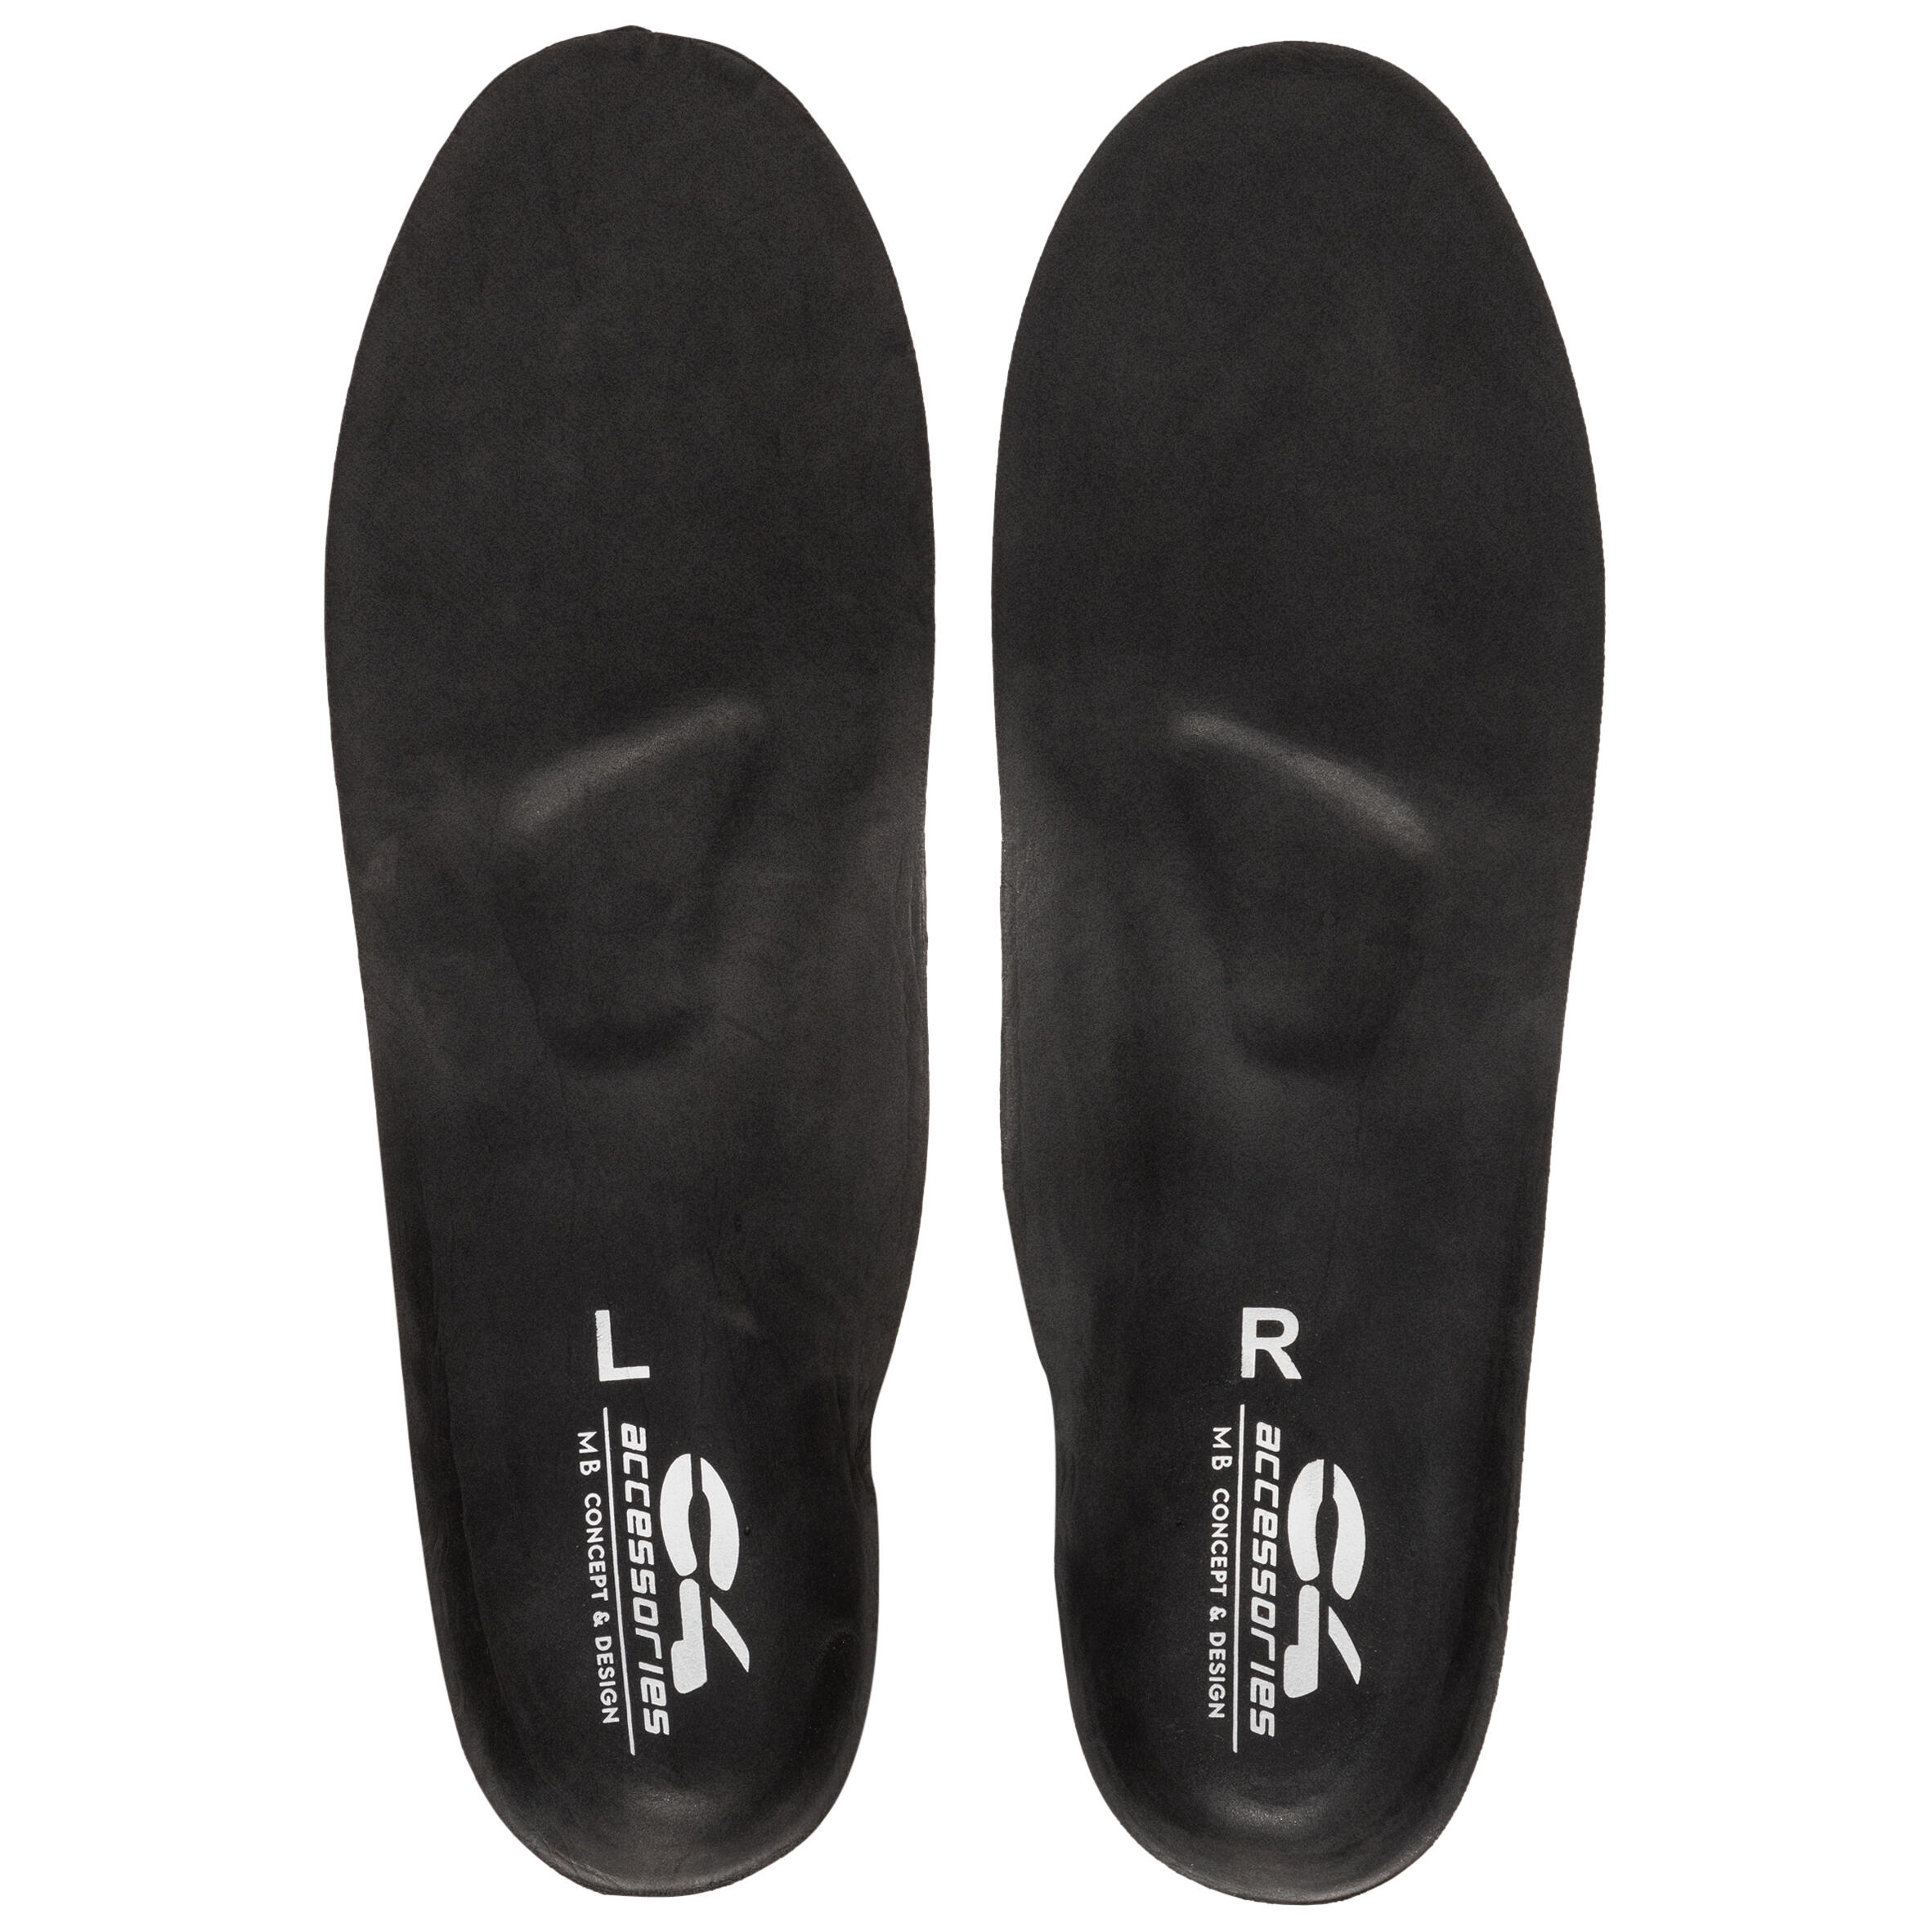 ANATOMIC SOLES C4 CARBON FOR SPEARFISHING AND FREEDIVING FINS 1/5